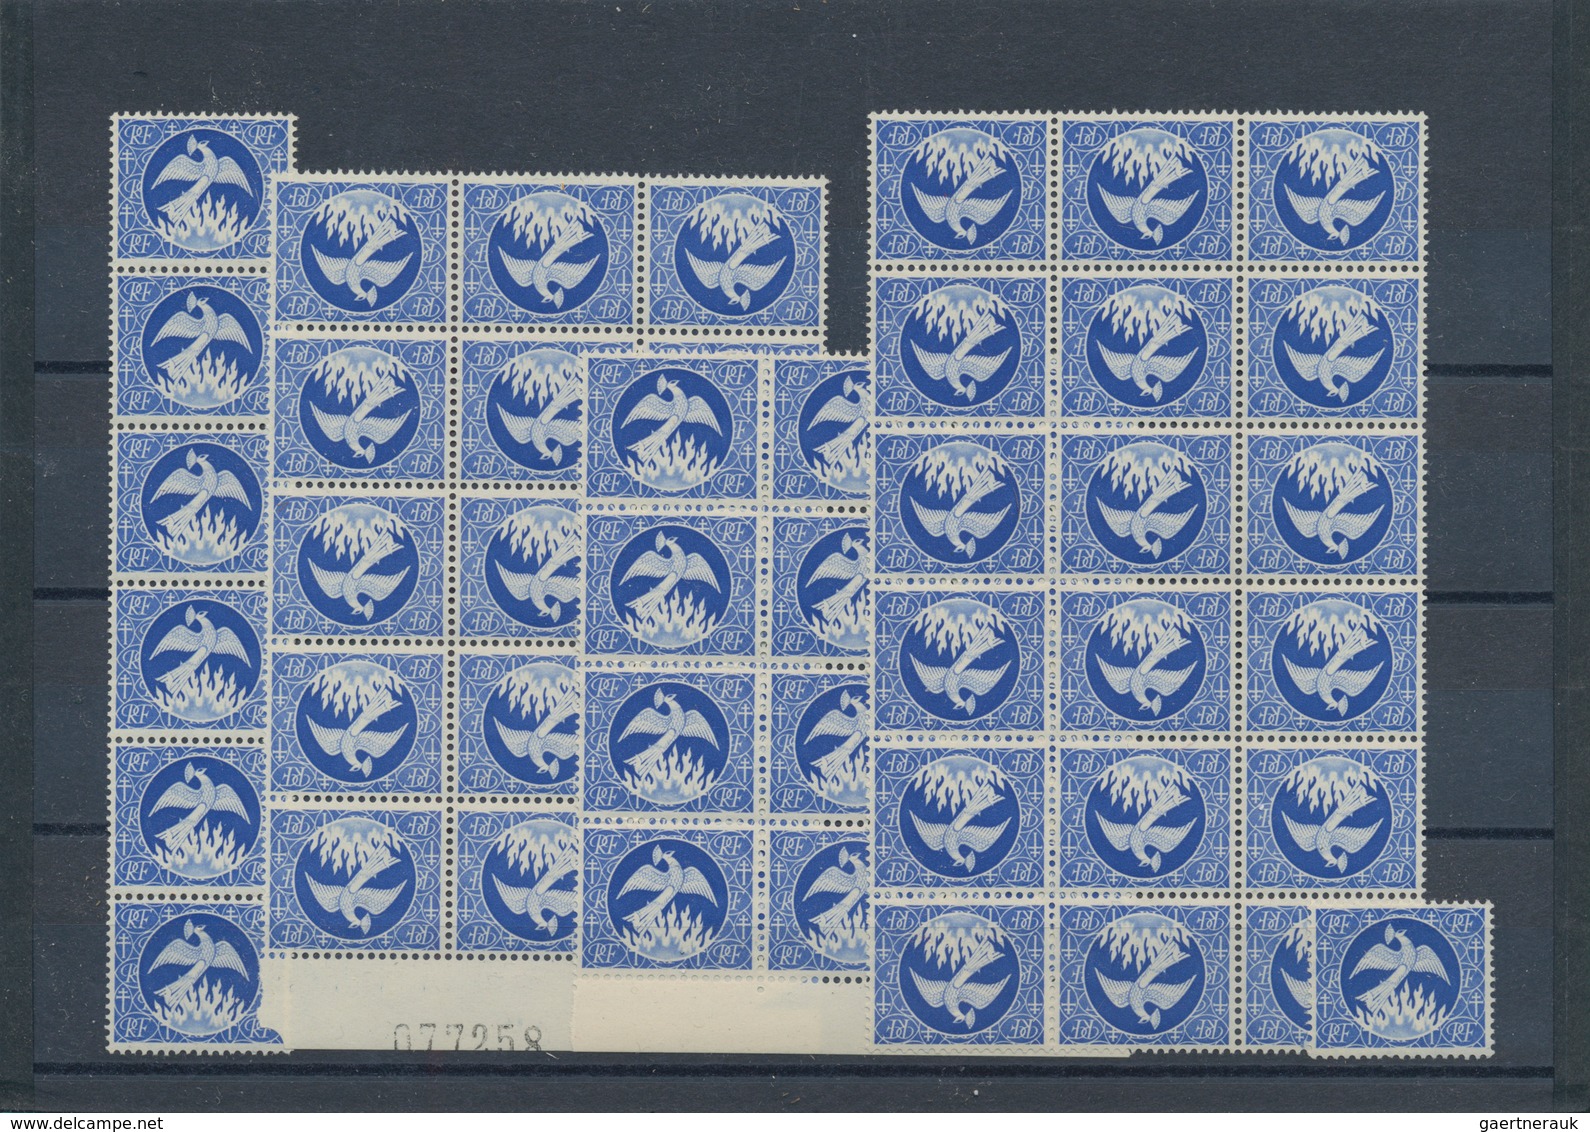 Frankreich: 1945, "Phoenix", Saving/Credit Stamp In Blue Without Value, 52 Stamps Within Units, Mint - Collections